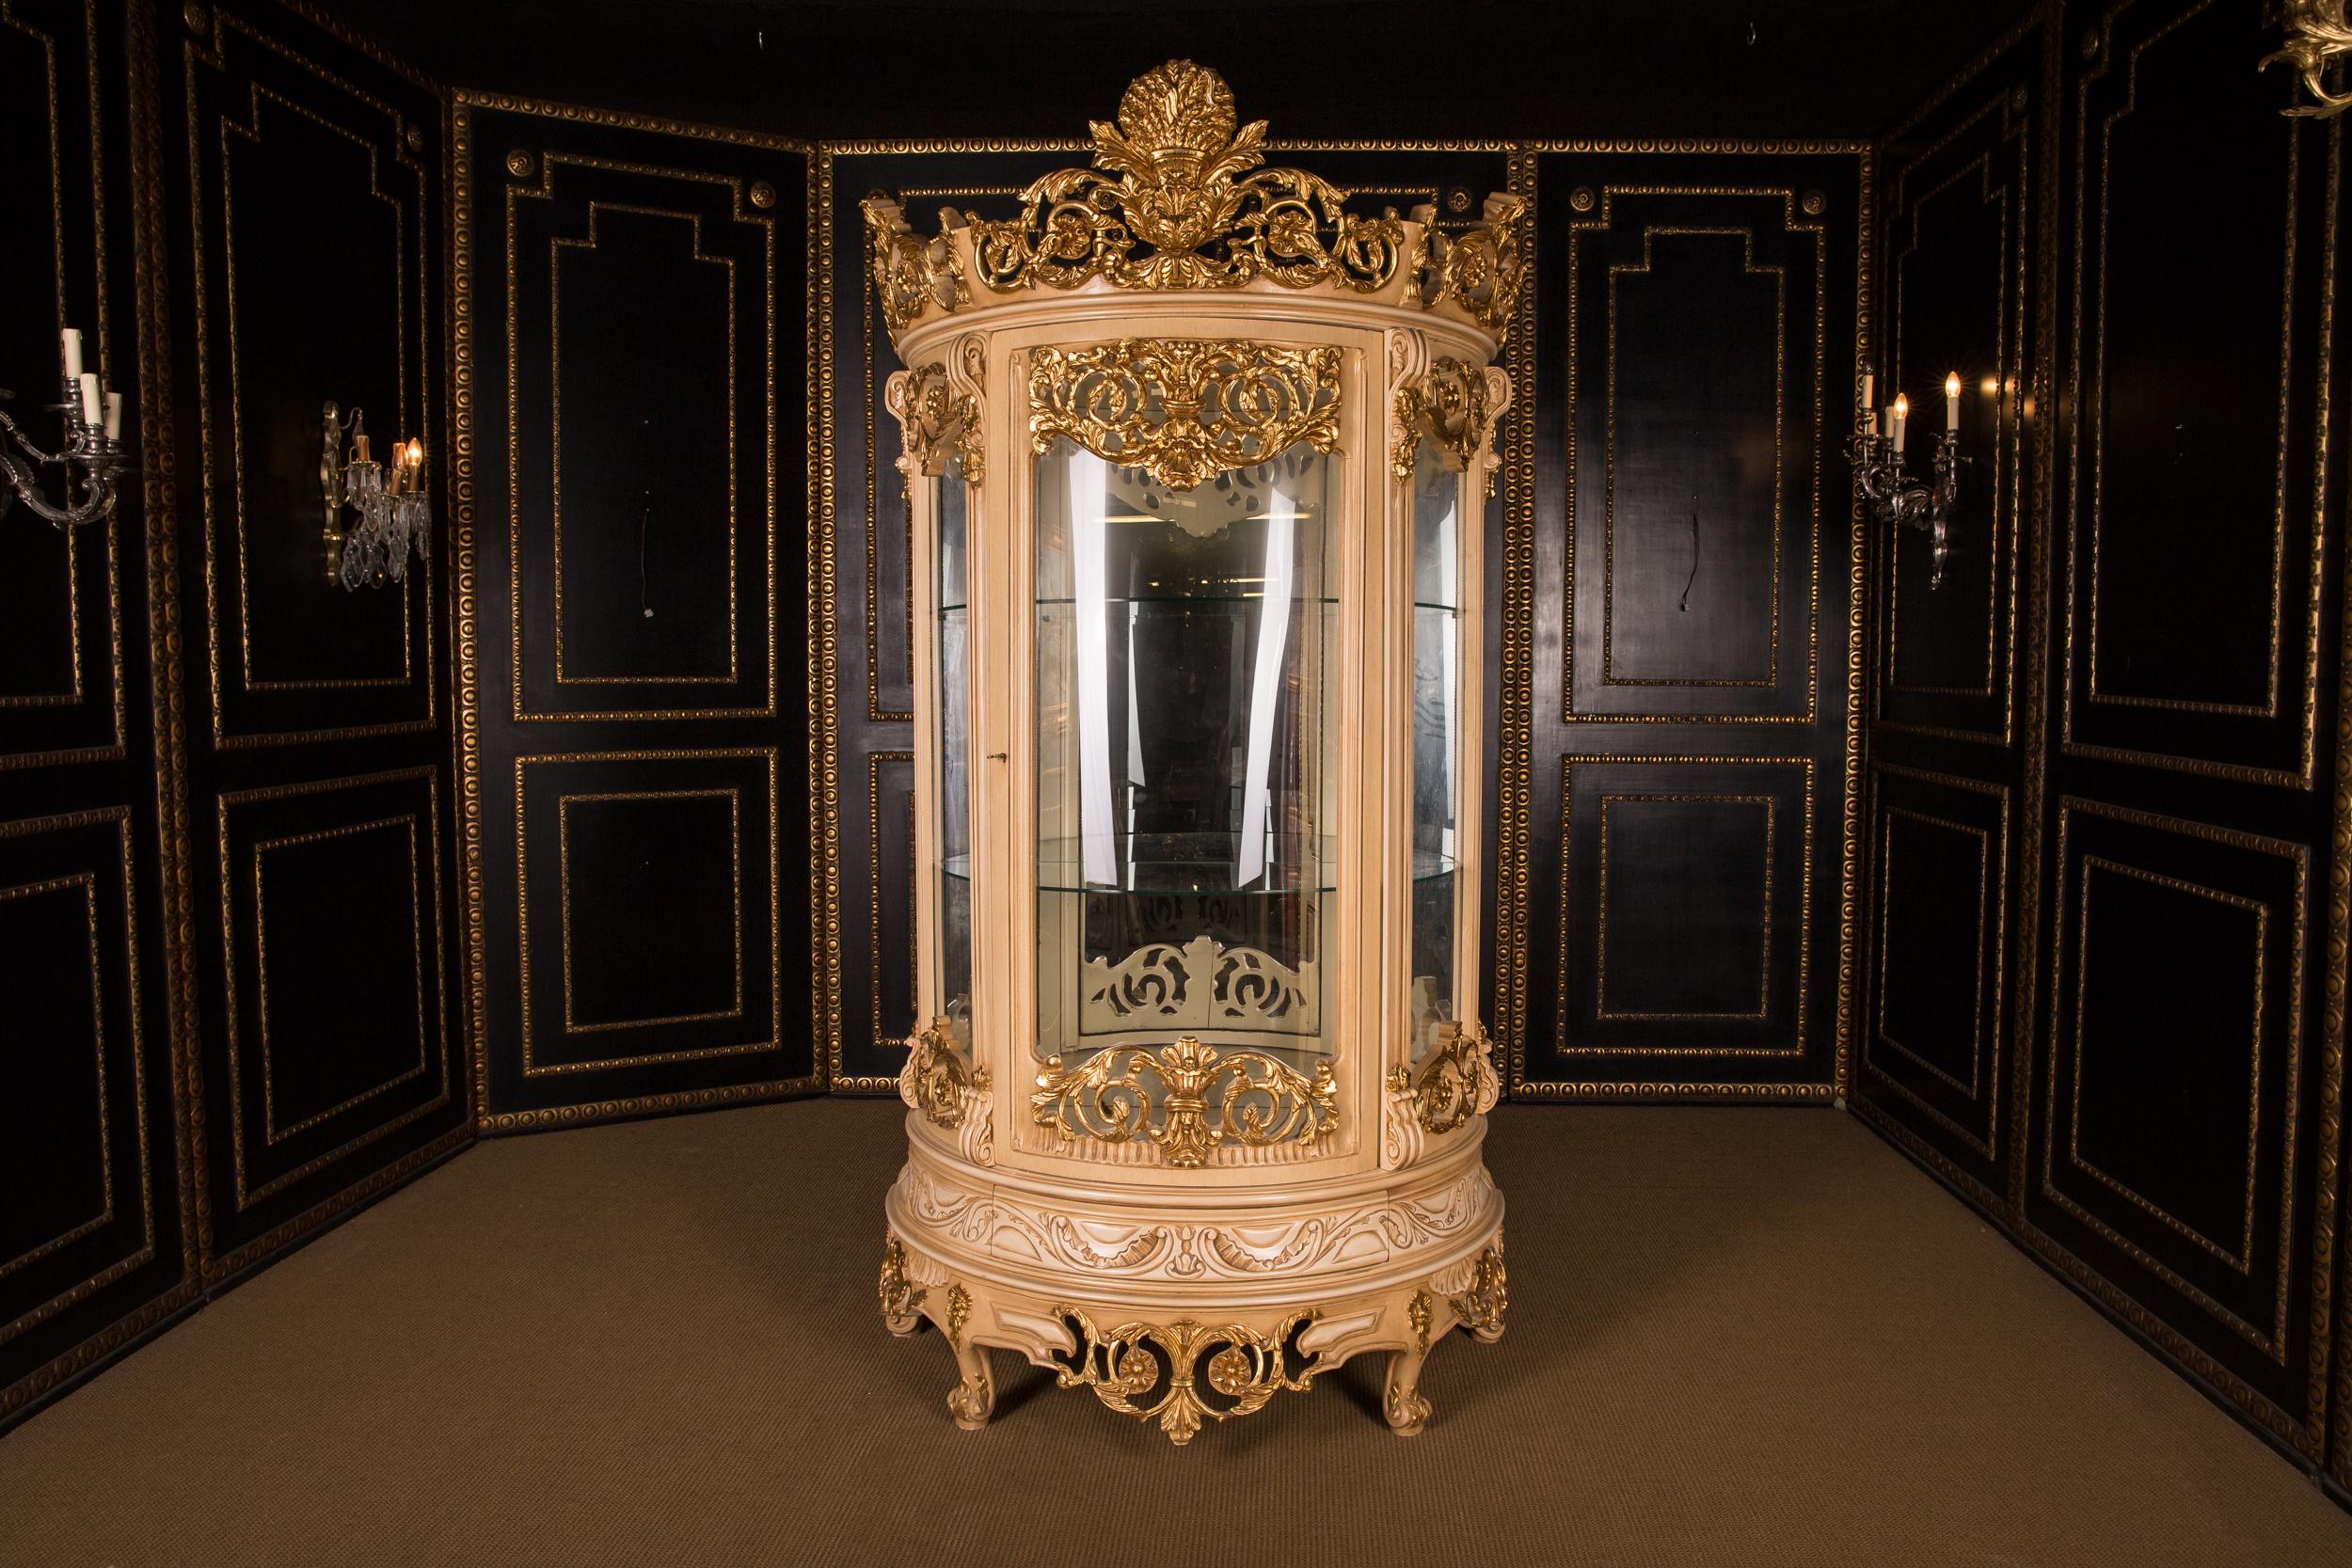 Massive, finely carved beech wood, colored and gilt gilded. High-rectangular, half-round and one-door cambered body, glazed from three sides. The entire showcase can be dismantled. On curved feet one-door scalloped frame. Back wall mirrored, three